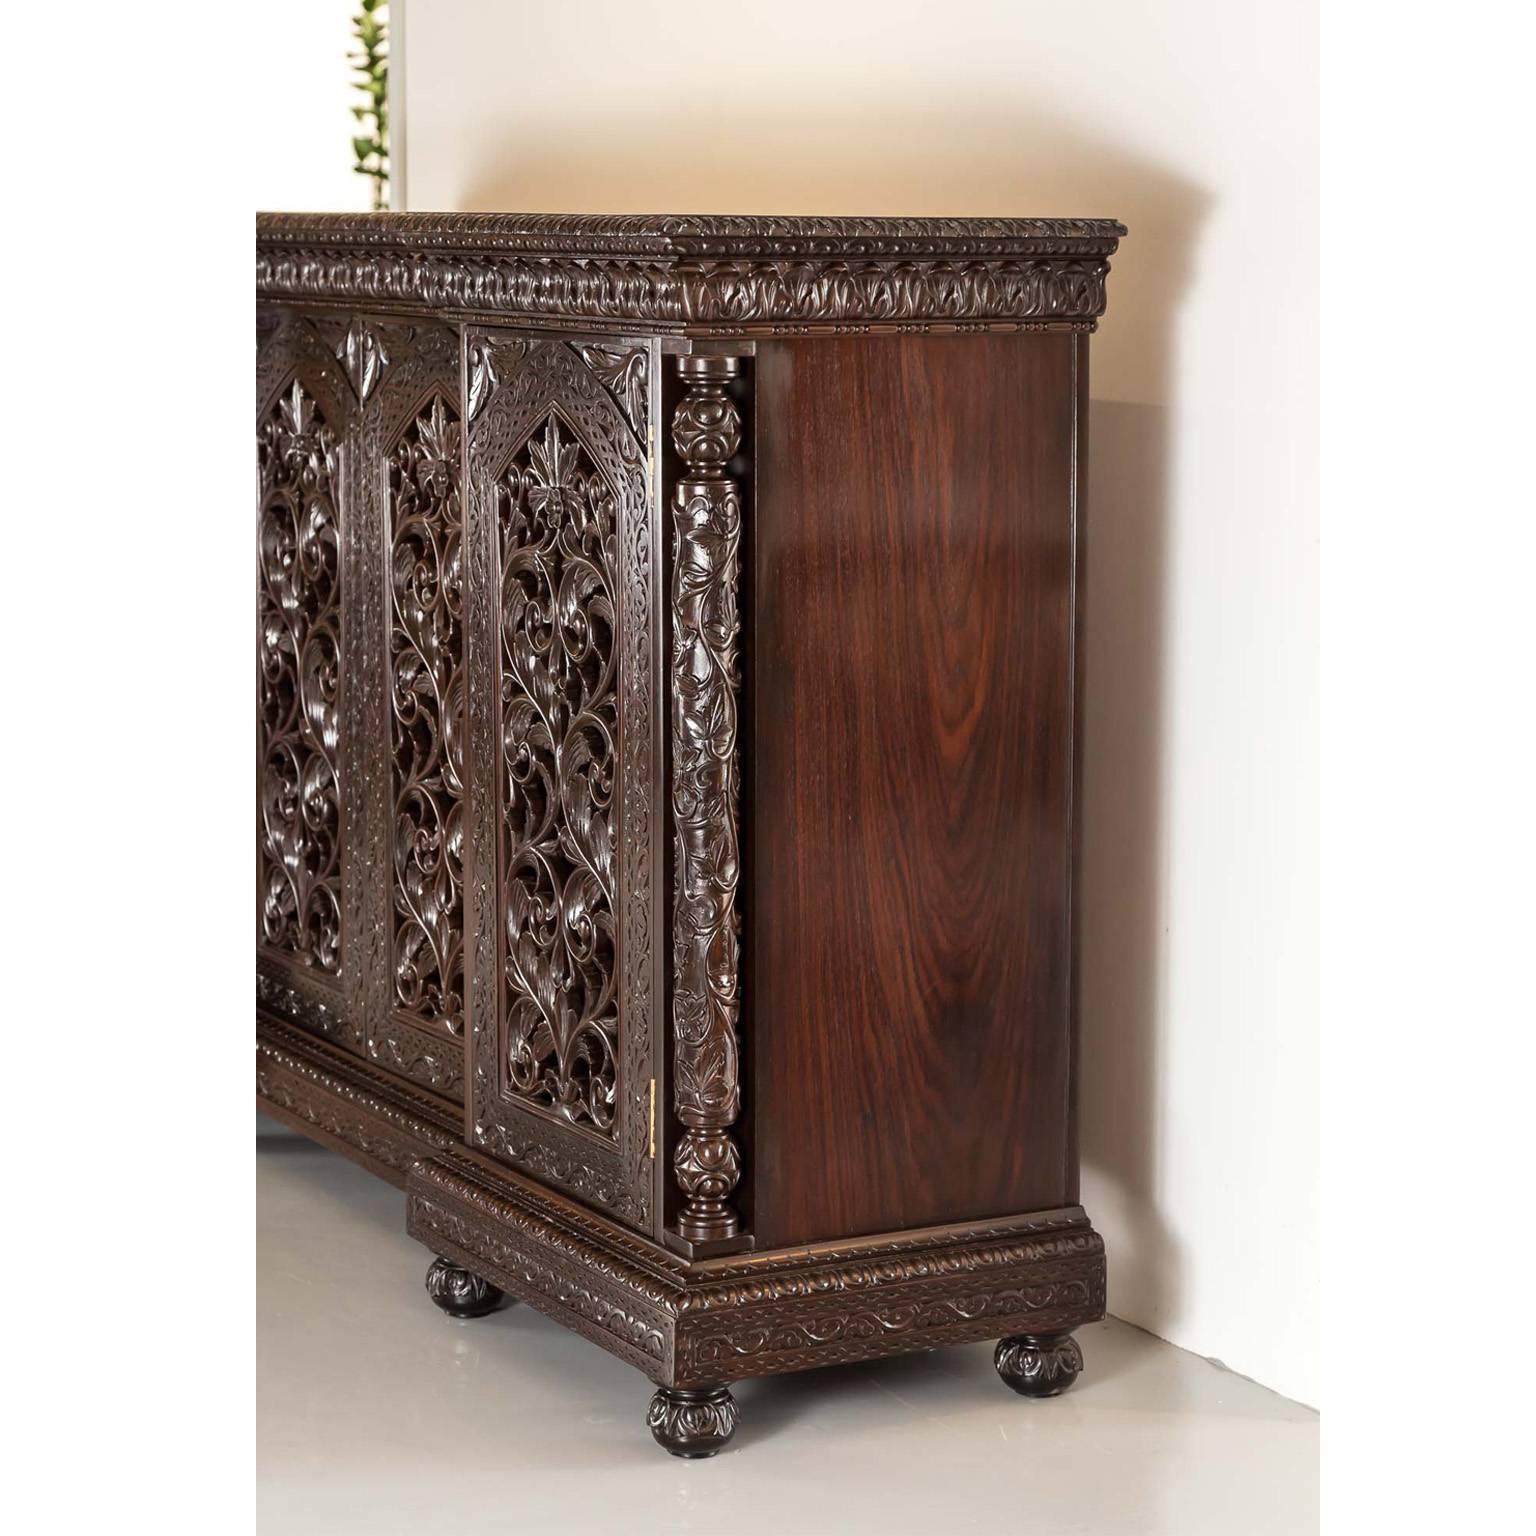 19th Century Antique Anglo-Indian or British Colonial Rosewood Breakfront Cabinet For Sale